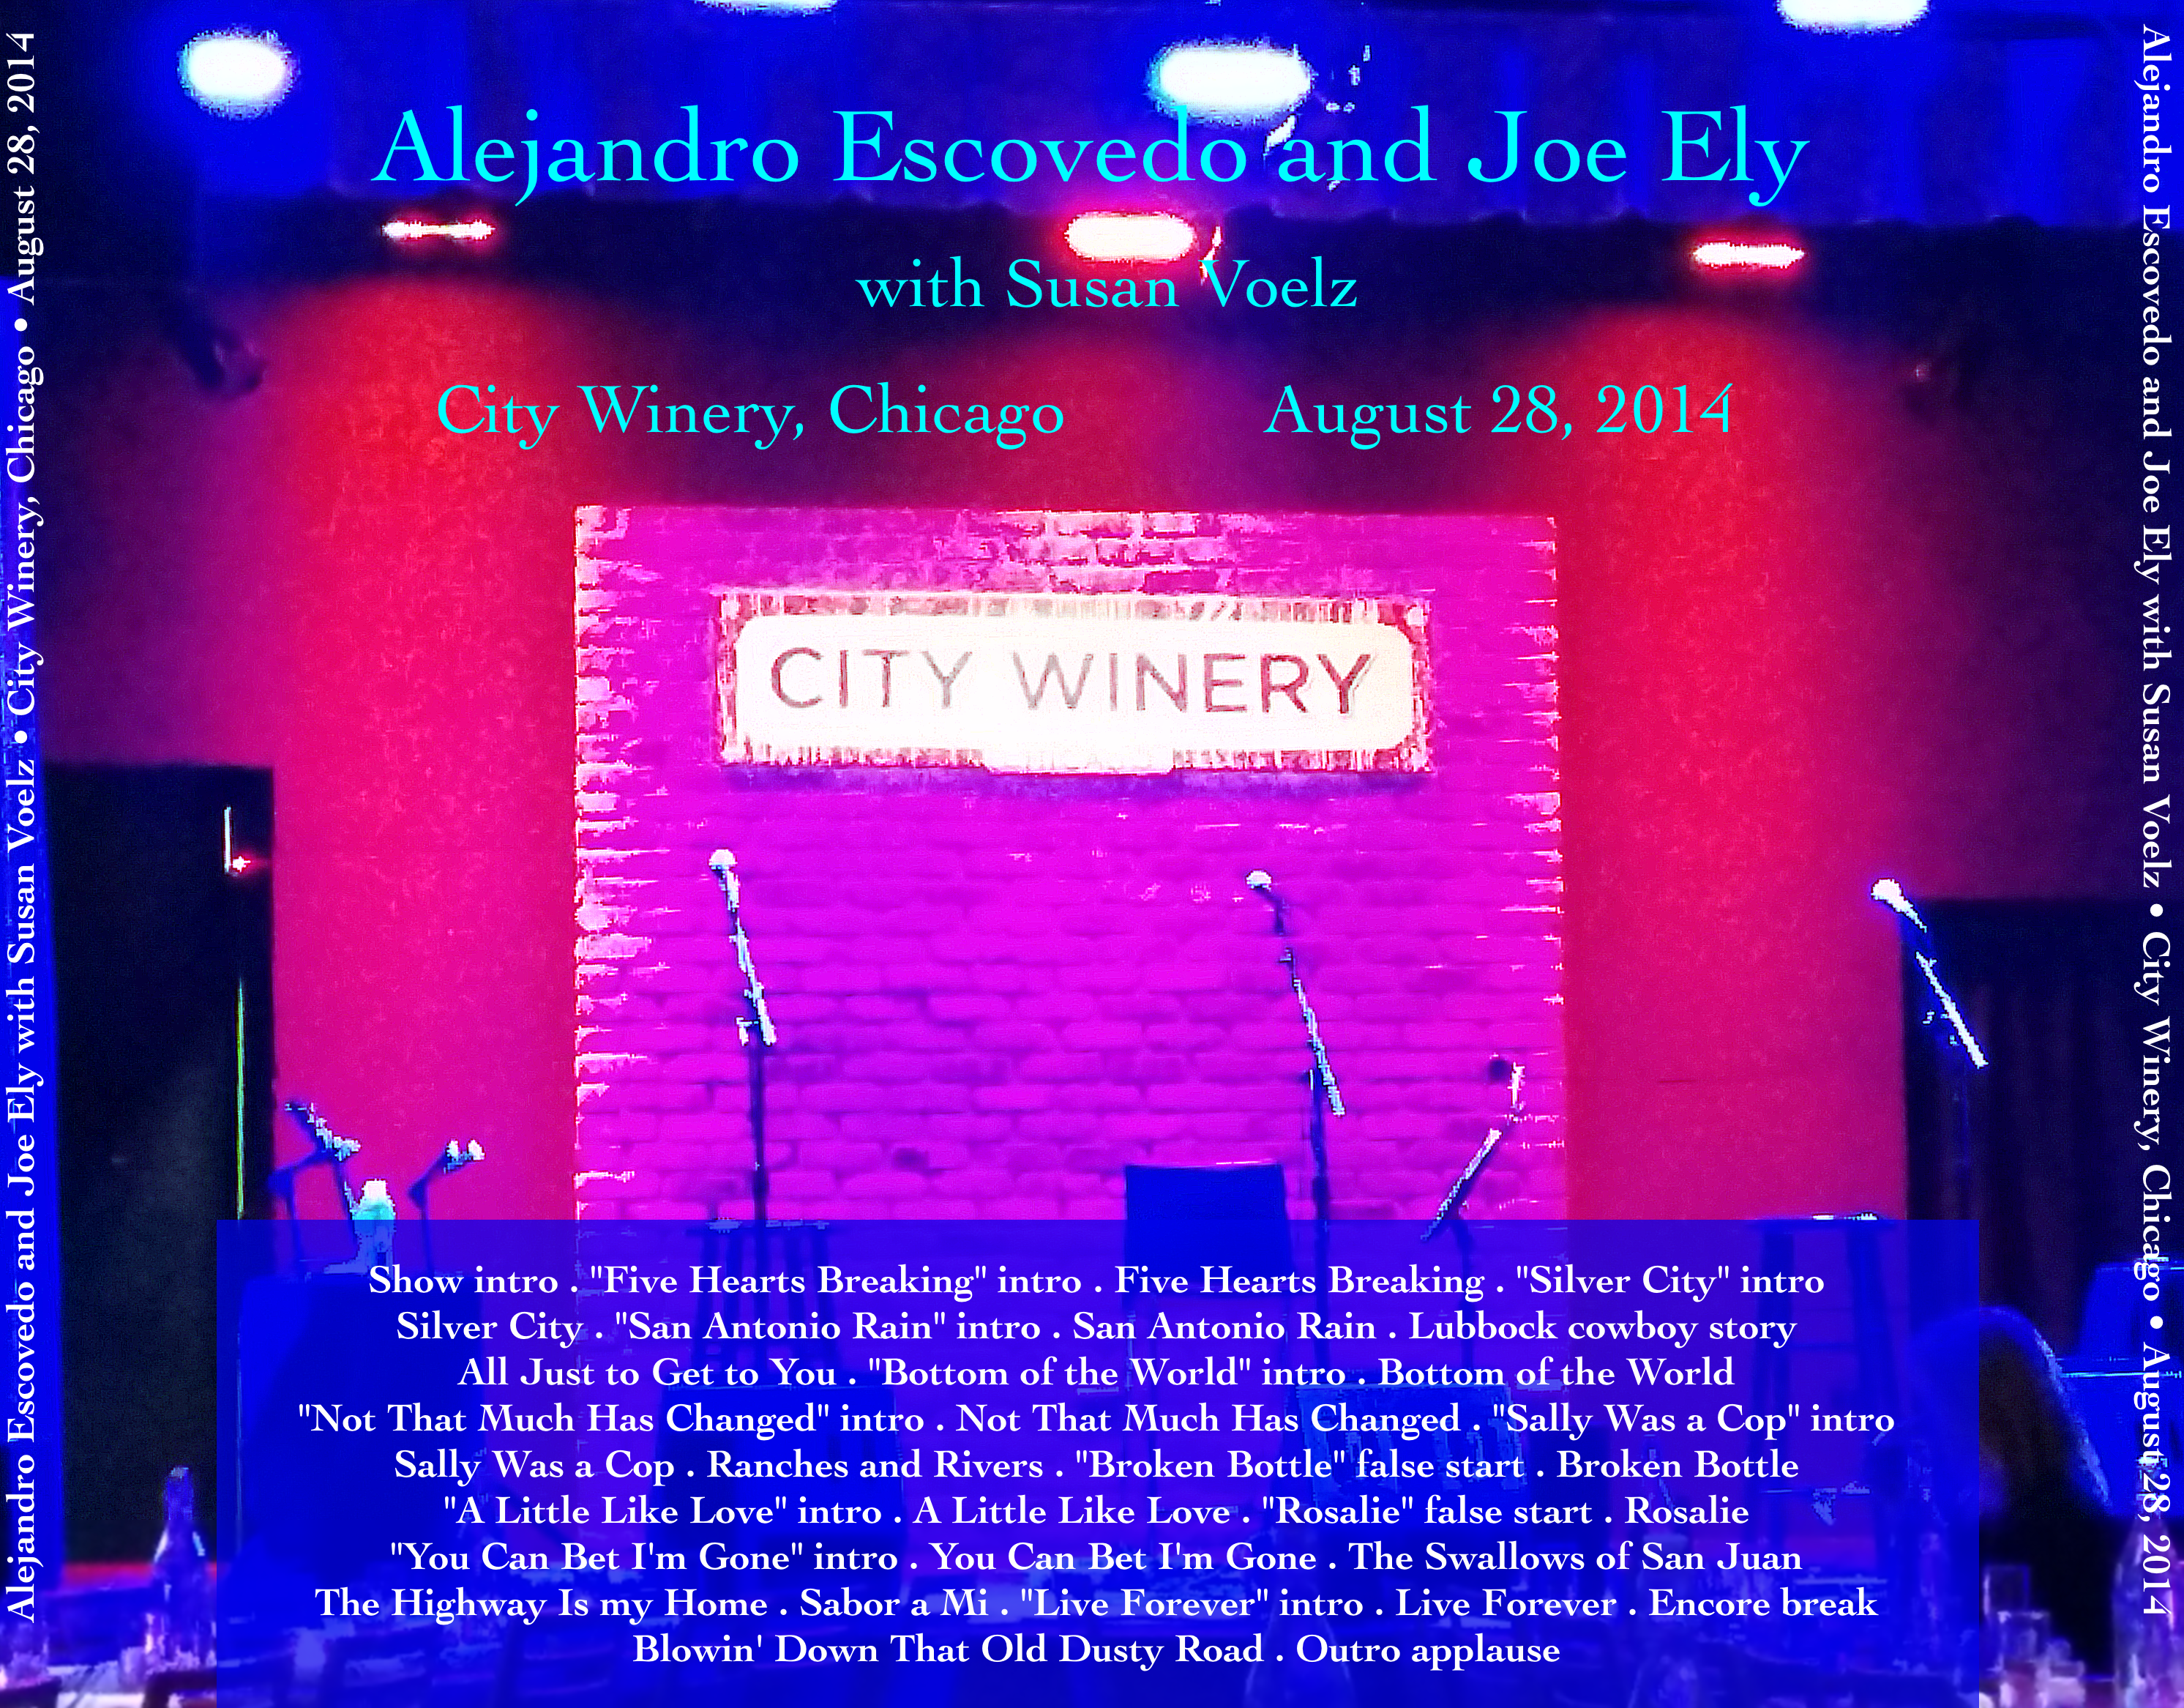 AlejandroEscovedoJoeEly2014-08-28CityWineryChicagoIL (2).png